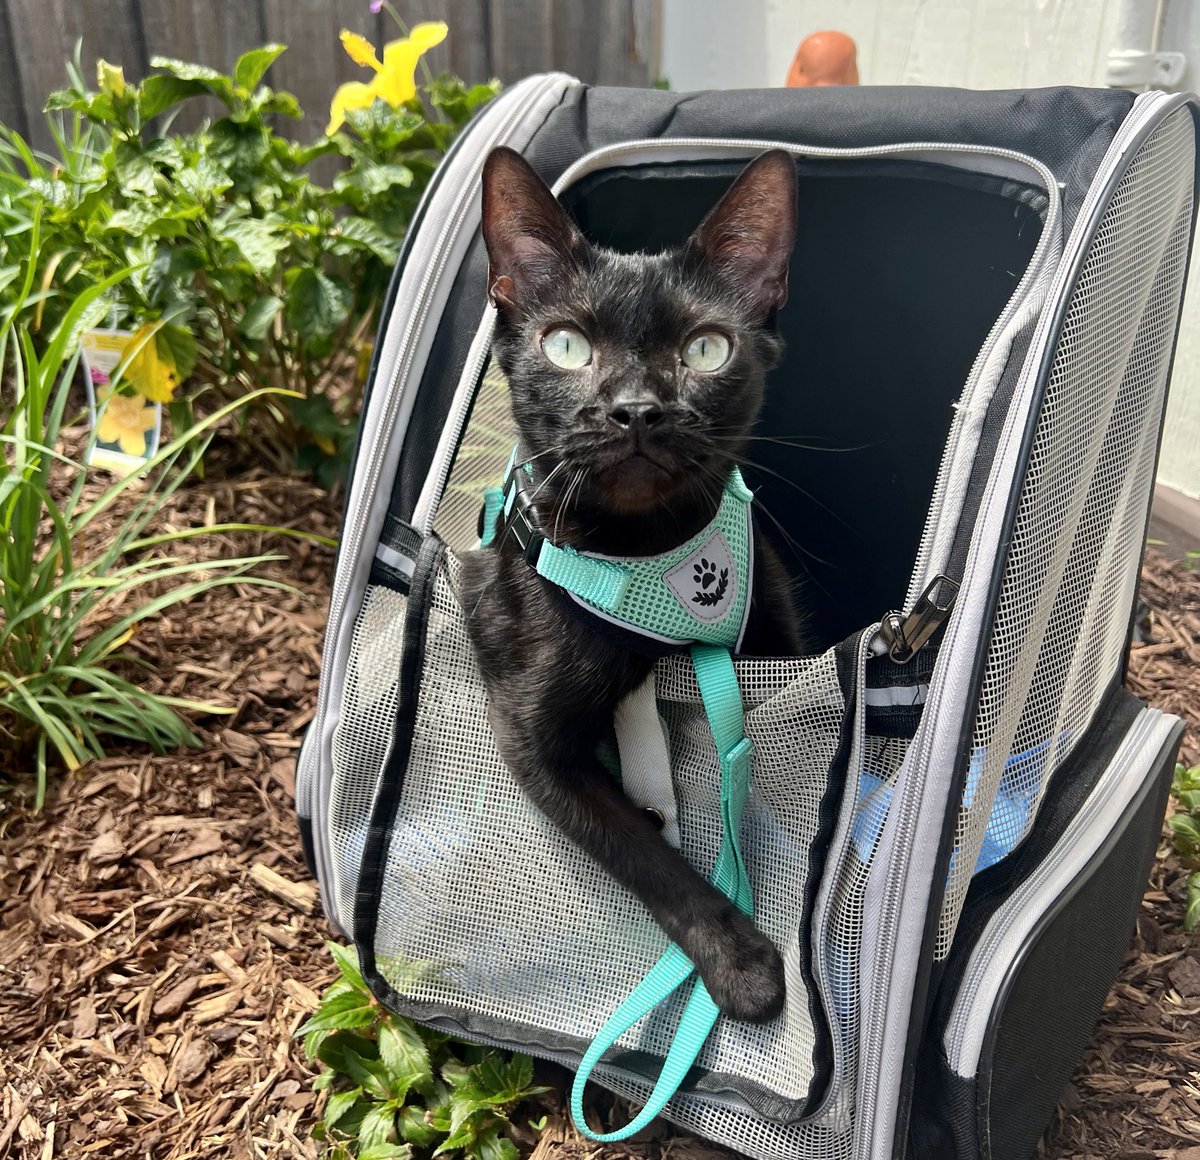 Off to Easter adventures! ☀️🐣🐾🐇 #sundayvibes #CatsLover